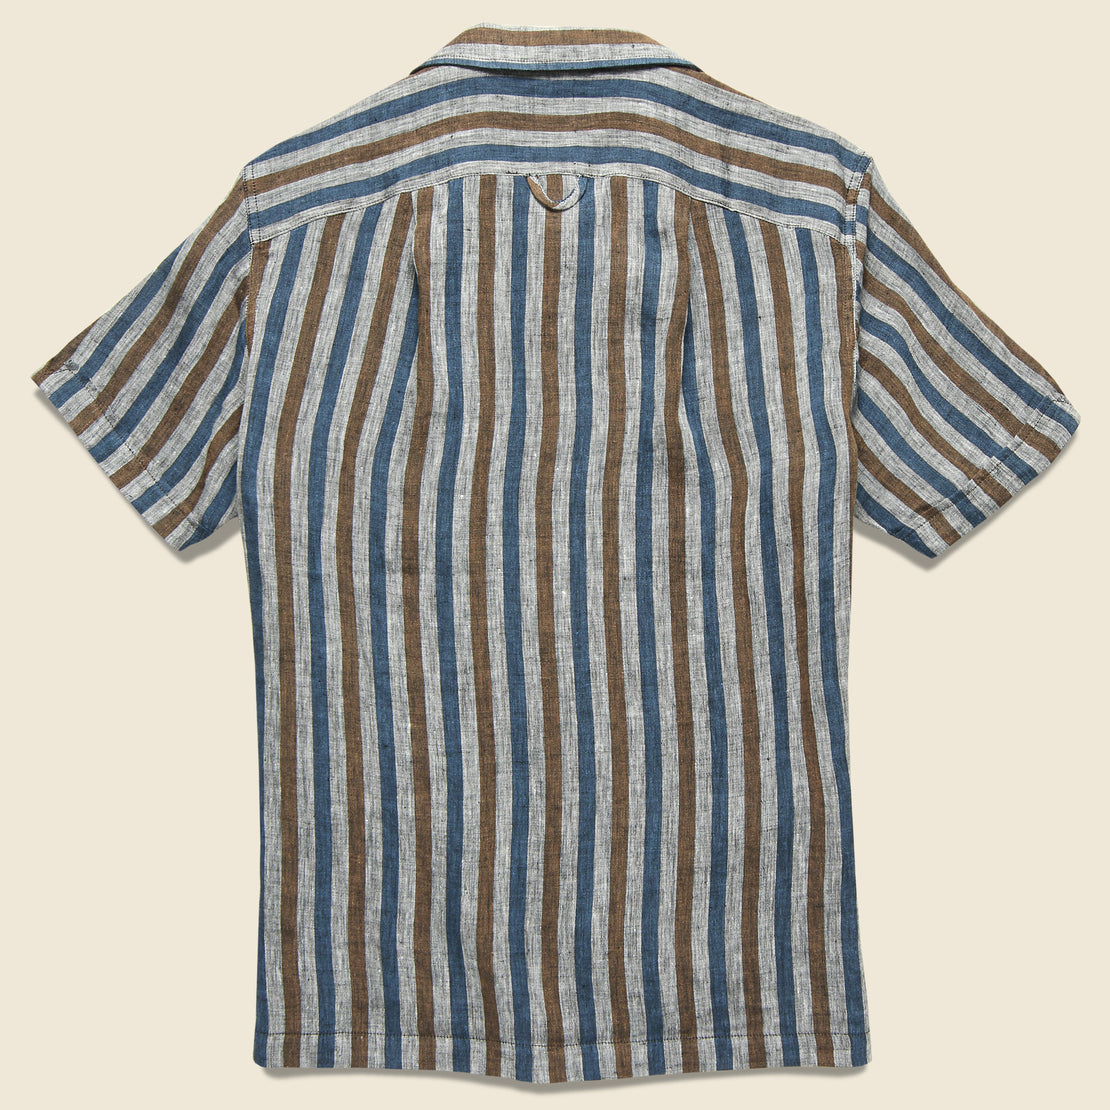 Vacation Shirt - Navy/Tan Stripe - Monitaly - STAG Provisions - Tops - S/S Woven - Stripe